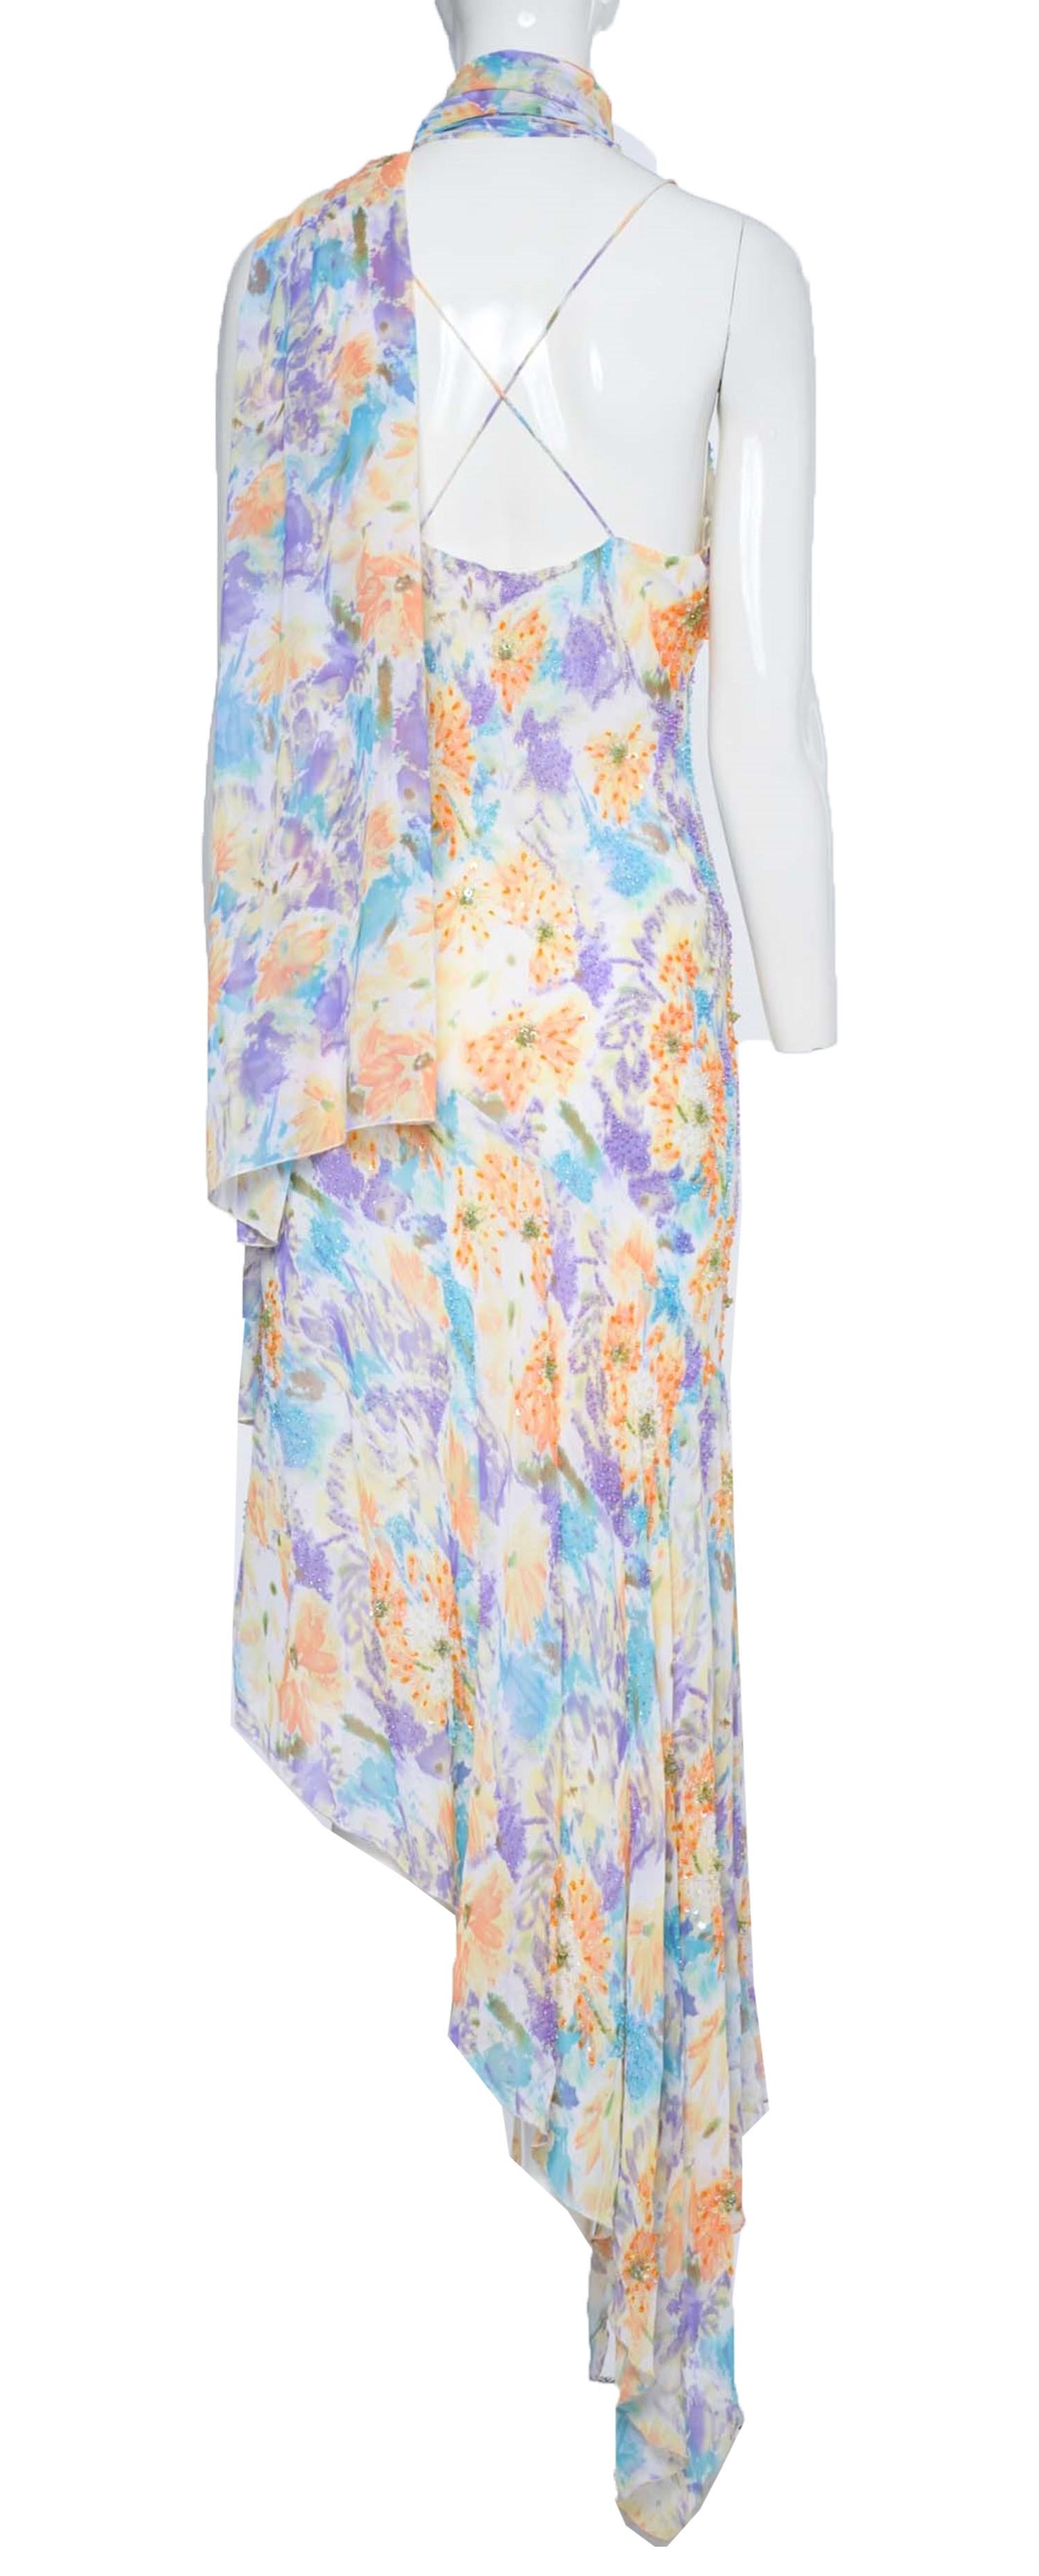 This vintage Diane Freis dress, with its stunning purple, blue, and orange floral print on an ivory background, is perfect for a variety of occasions. Whether you're attending a cocktail party or a summer wedding as a guest, this dress will help you